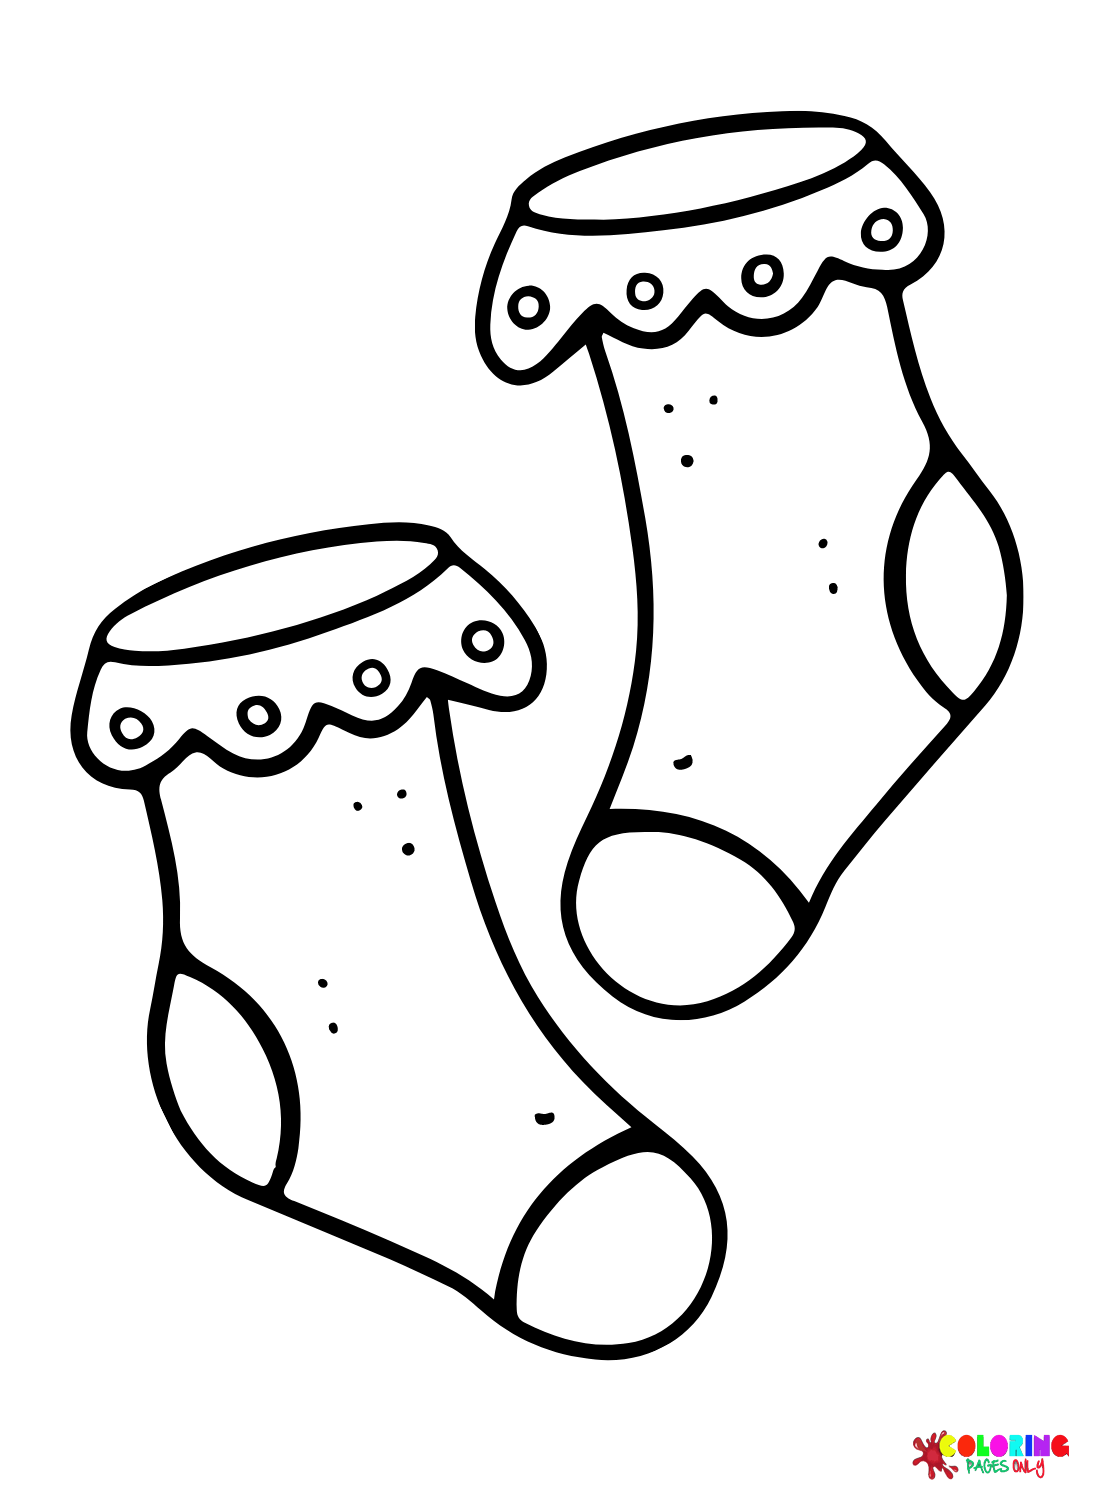 Lovely Socks Coloring Page - Free Printable Coloring Pages